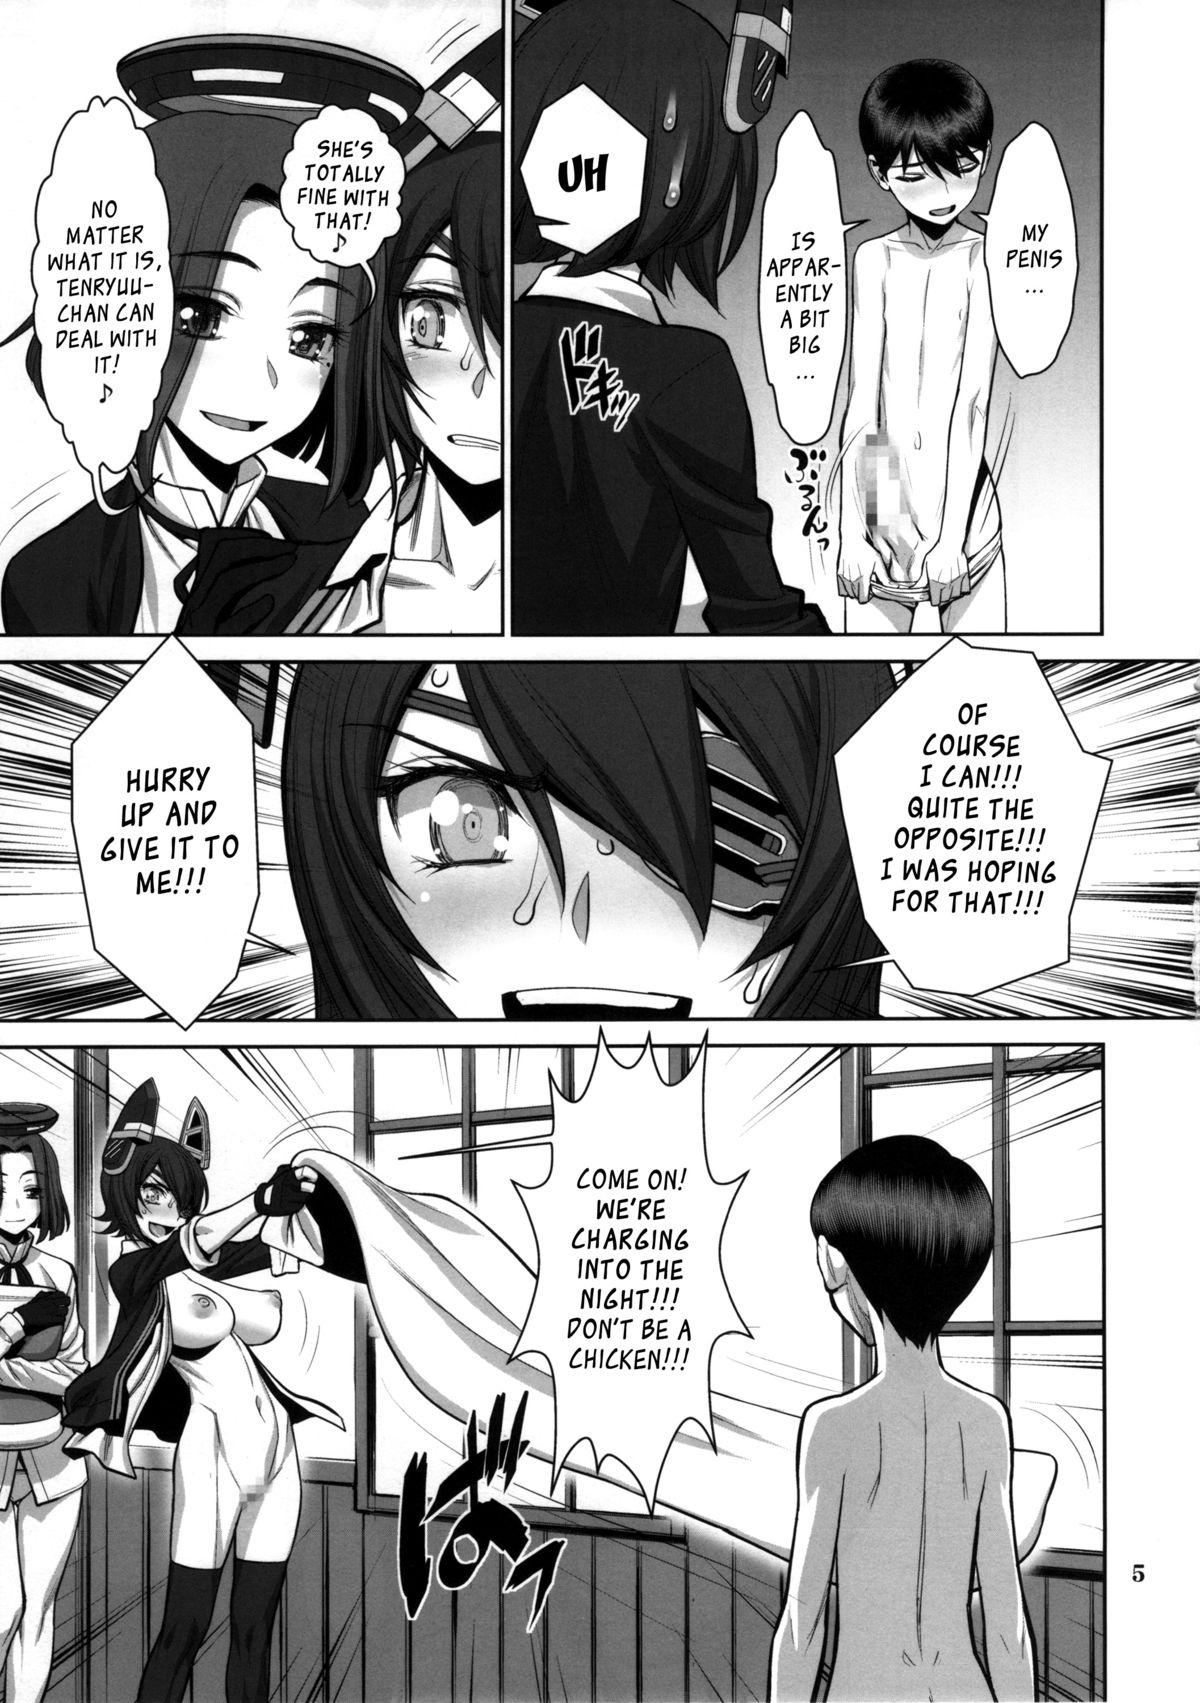 Bus ONTFK - My Name is Tenryuu! Fufufu... You Scared? - Kantai collection Parody - Page 4